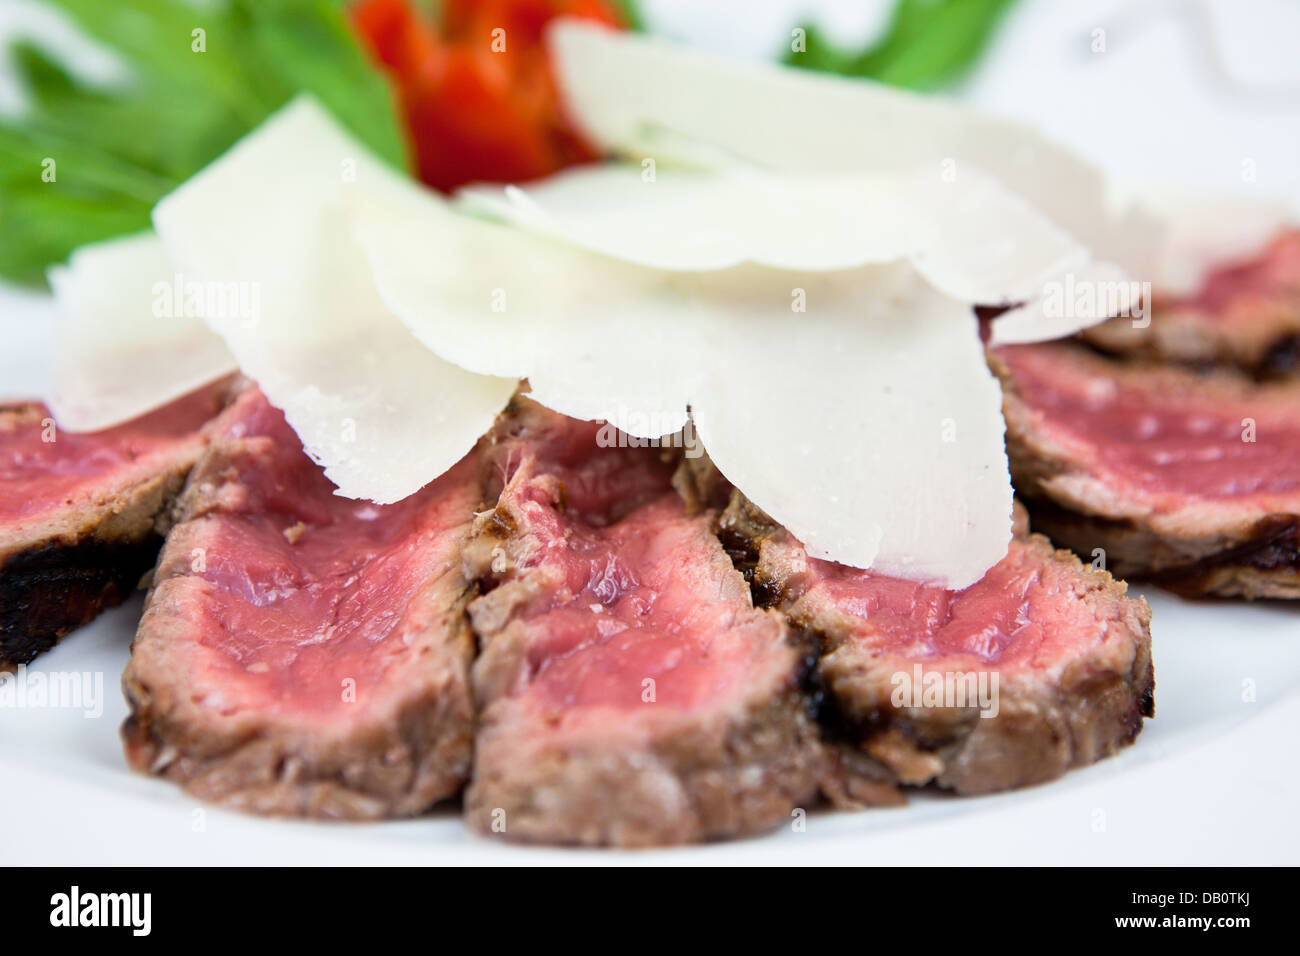 tenderloin with cheese, tomatoes and vegetables Stock Photo